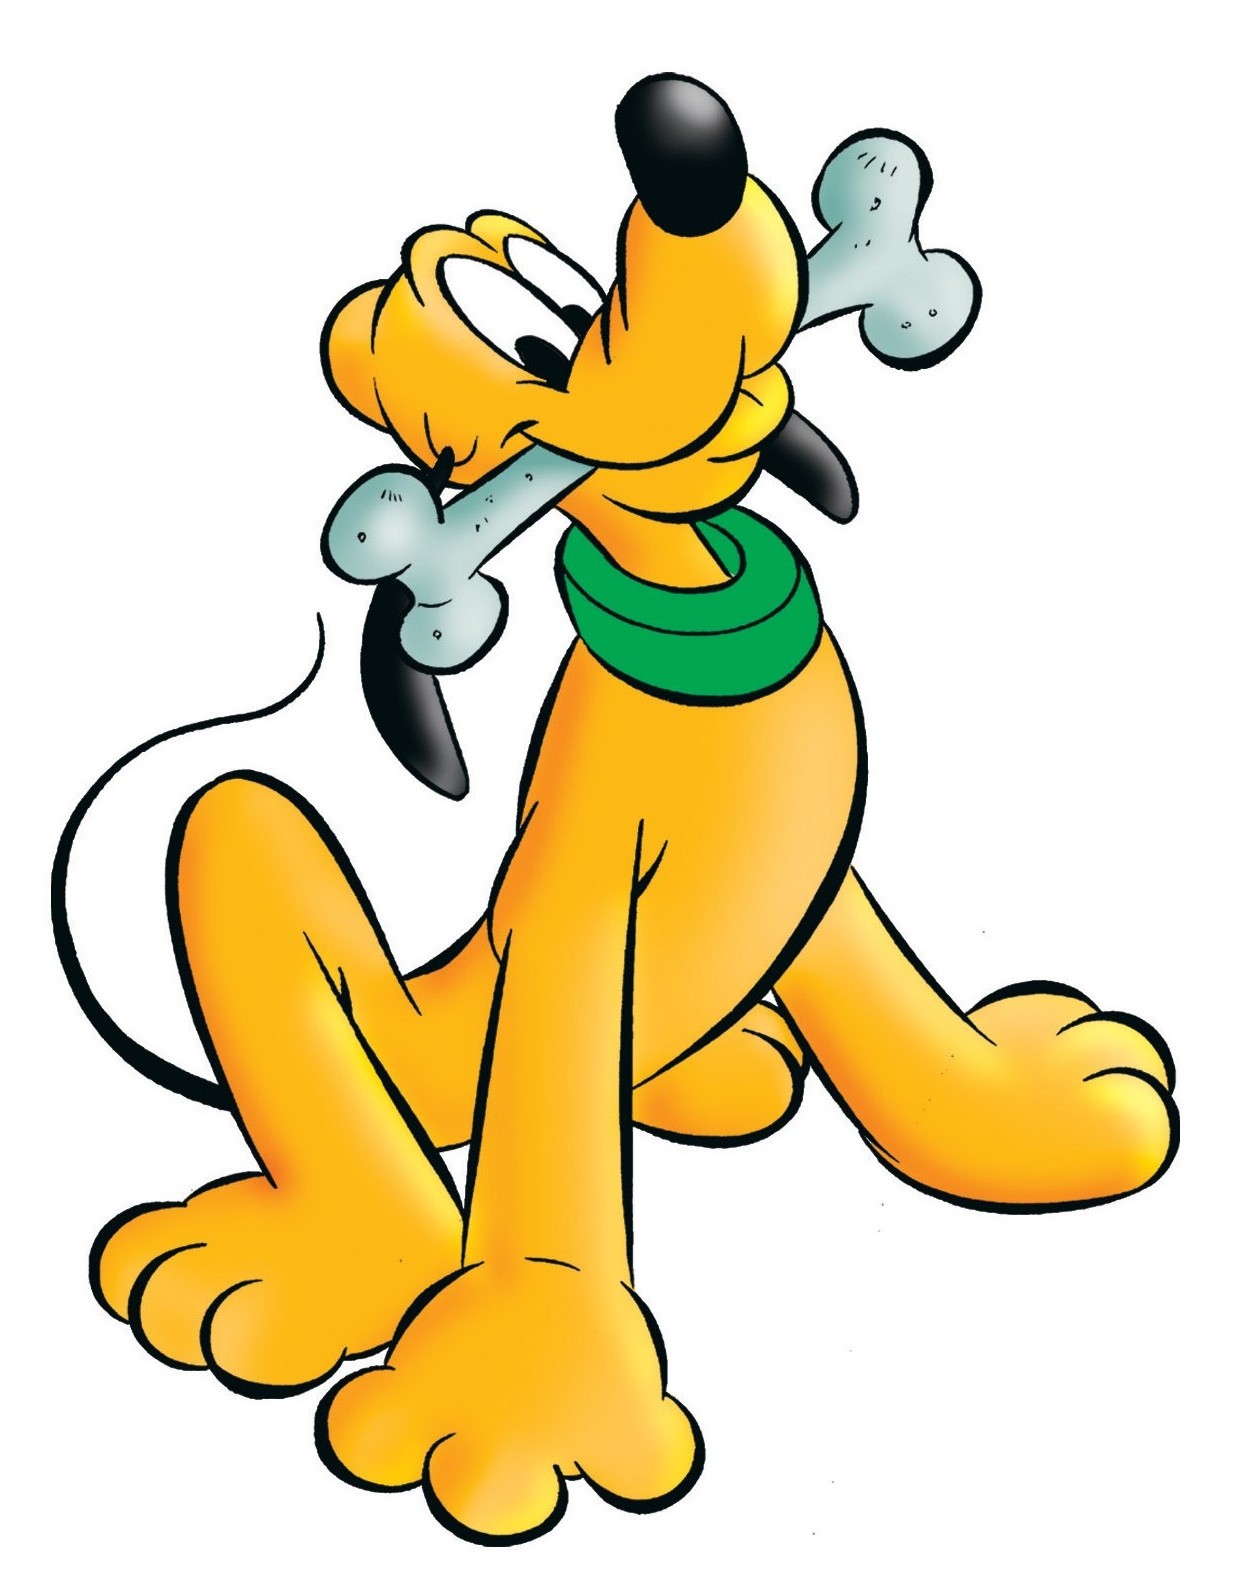 Pluto The Dog - ClipArt Best